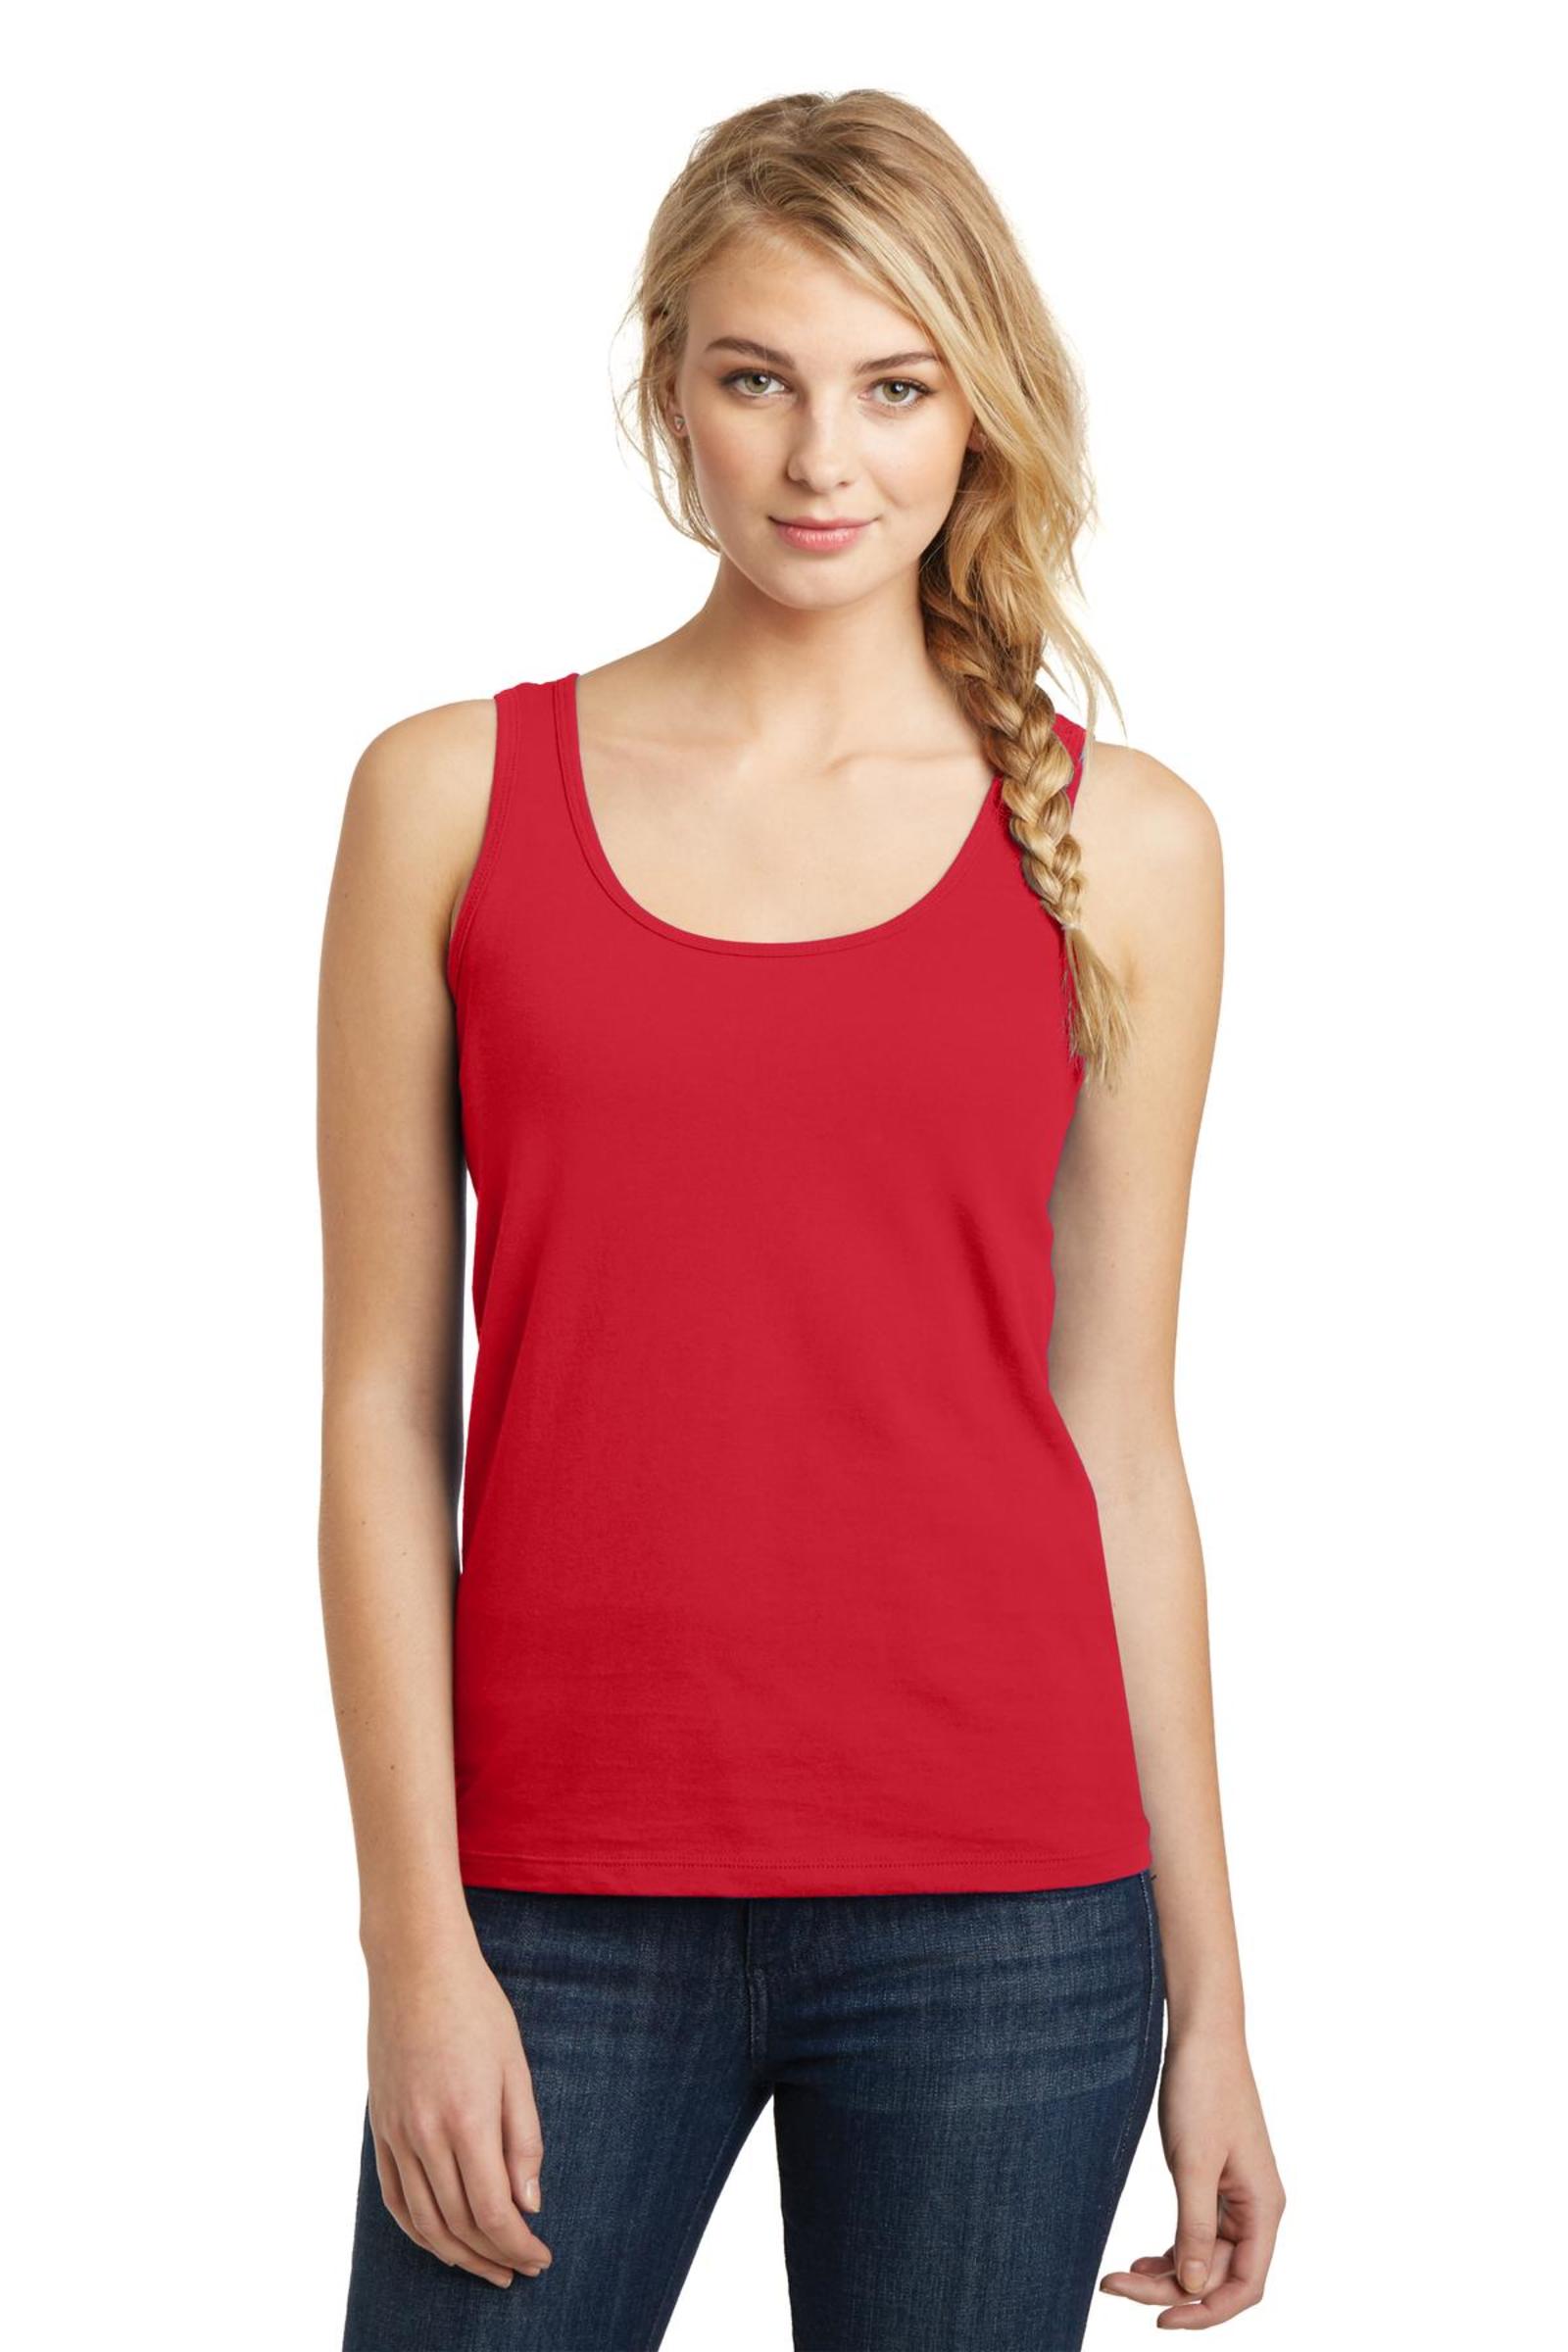 District Embroidered Women's Concert Tank